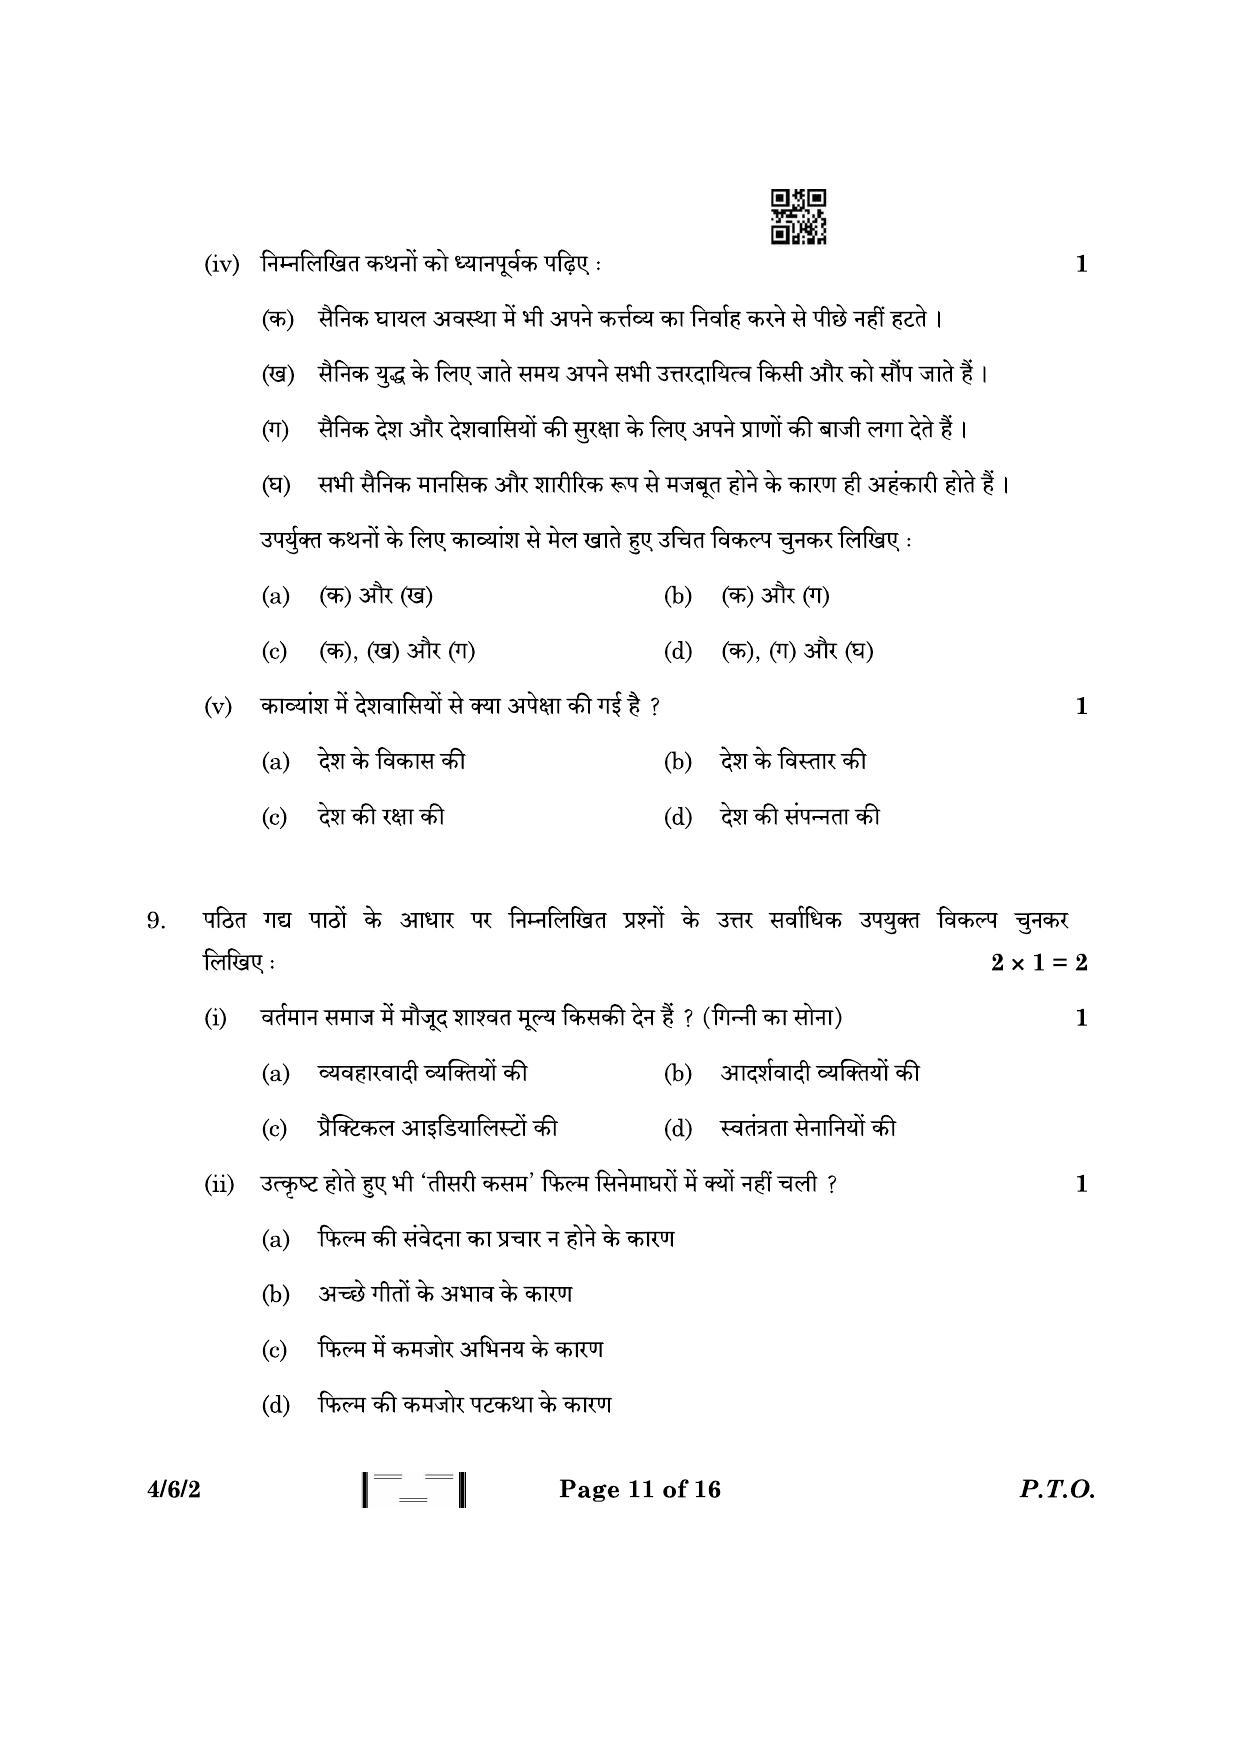 CBSE Class 10 4-6-2 Hindi B 2023 Question Paper - Page 11